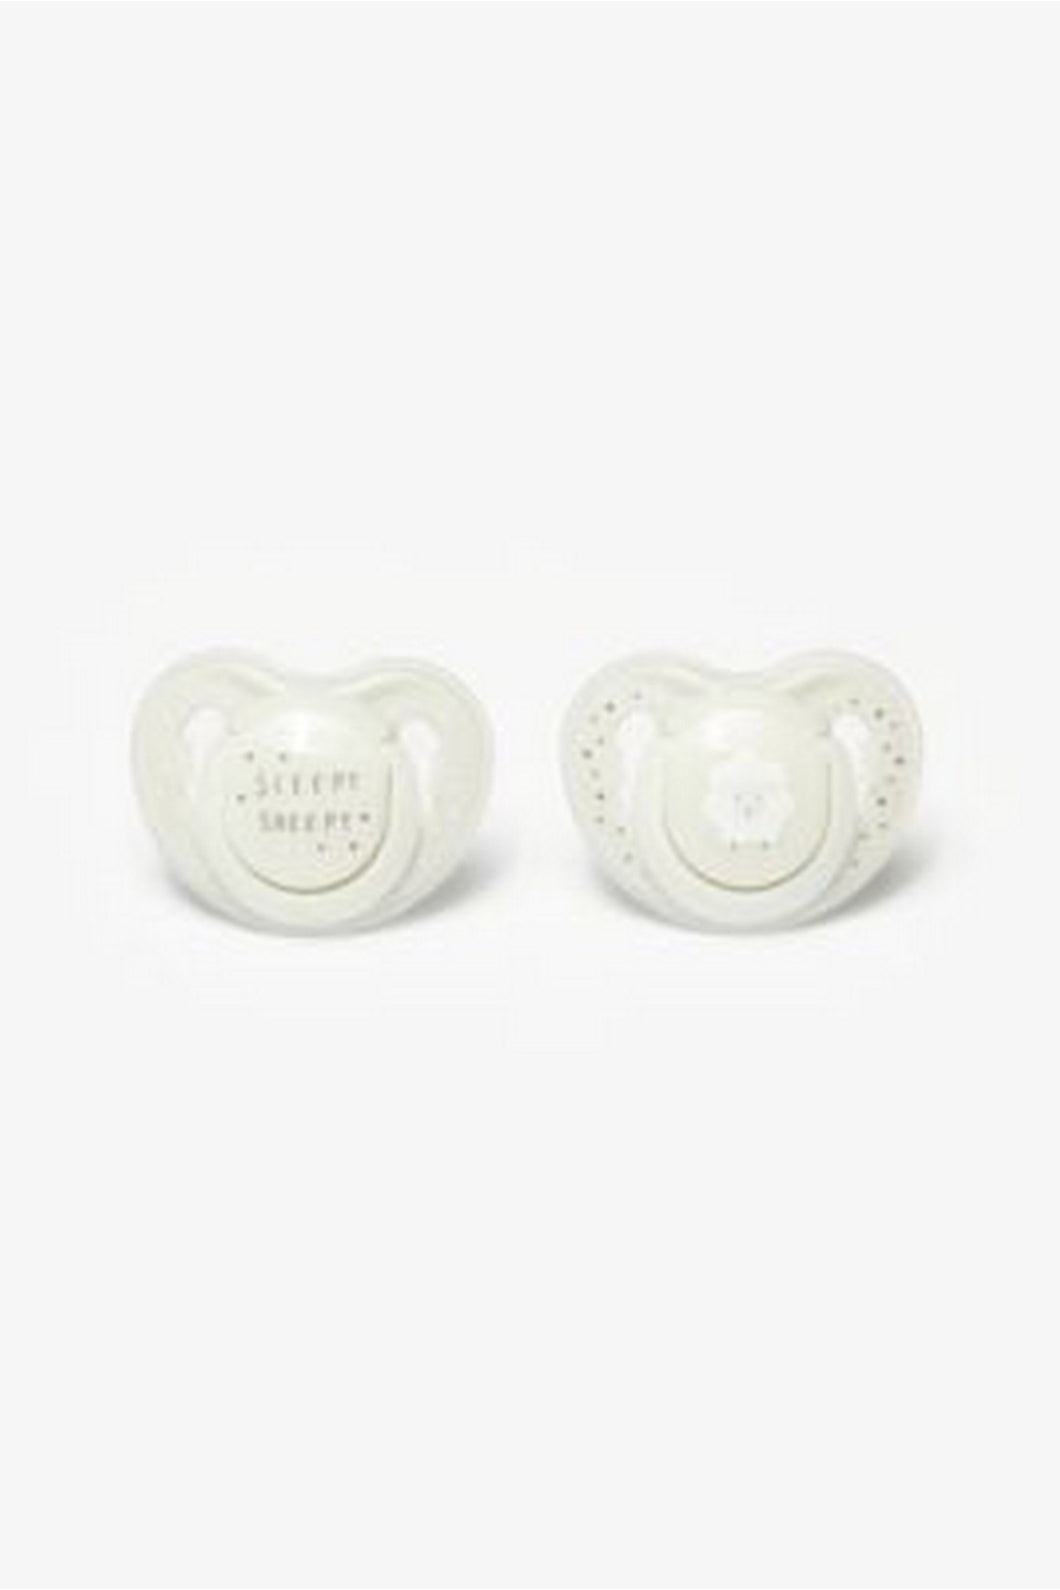 Mothercare Sleepy Sheepy Airflow Night Soothers Birth 6 Months 2 Pack 1